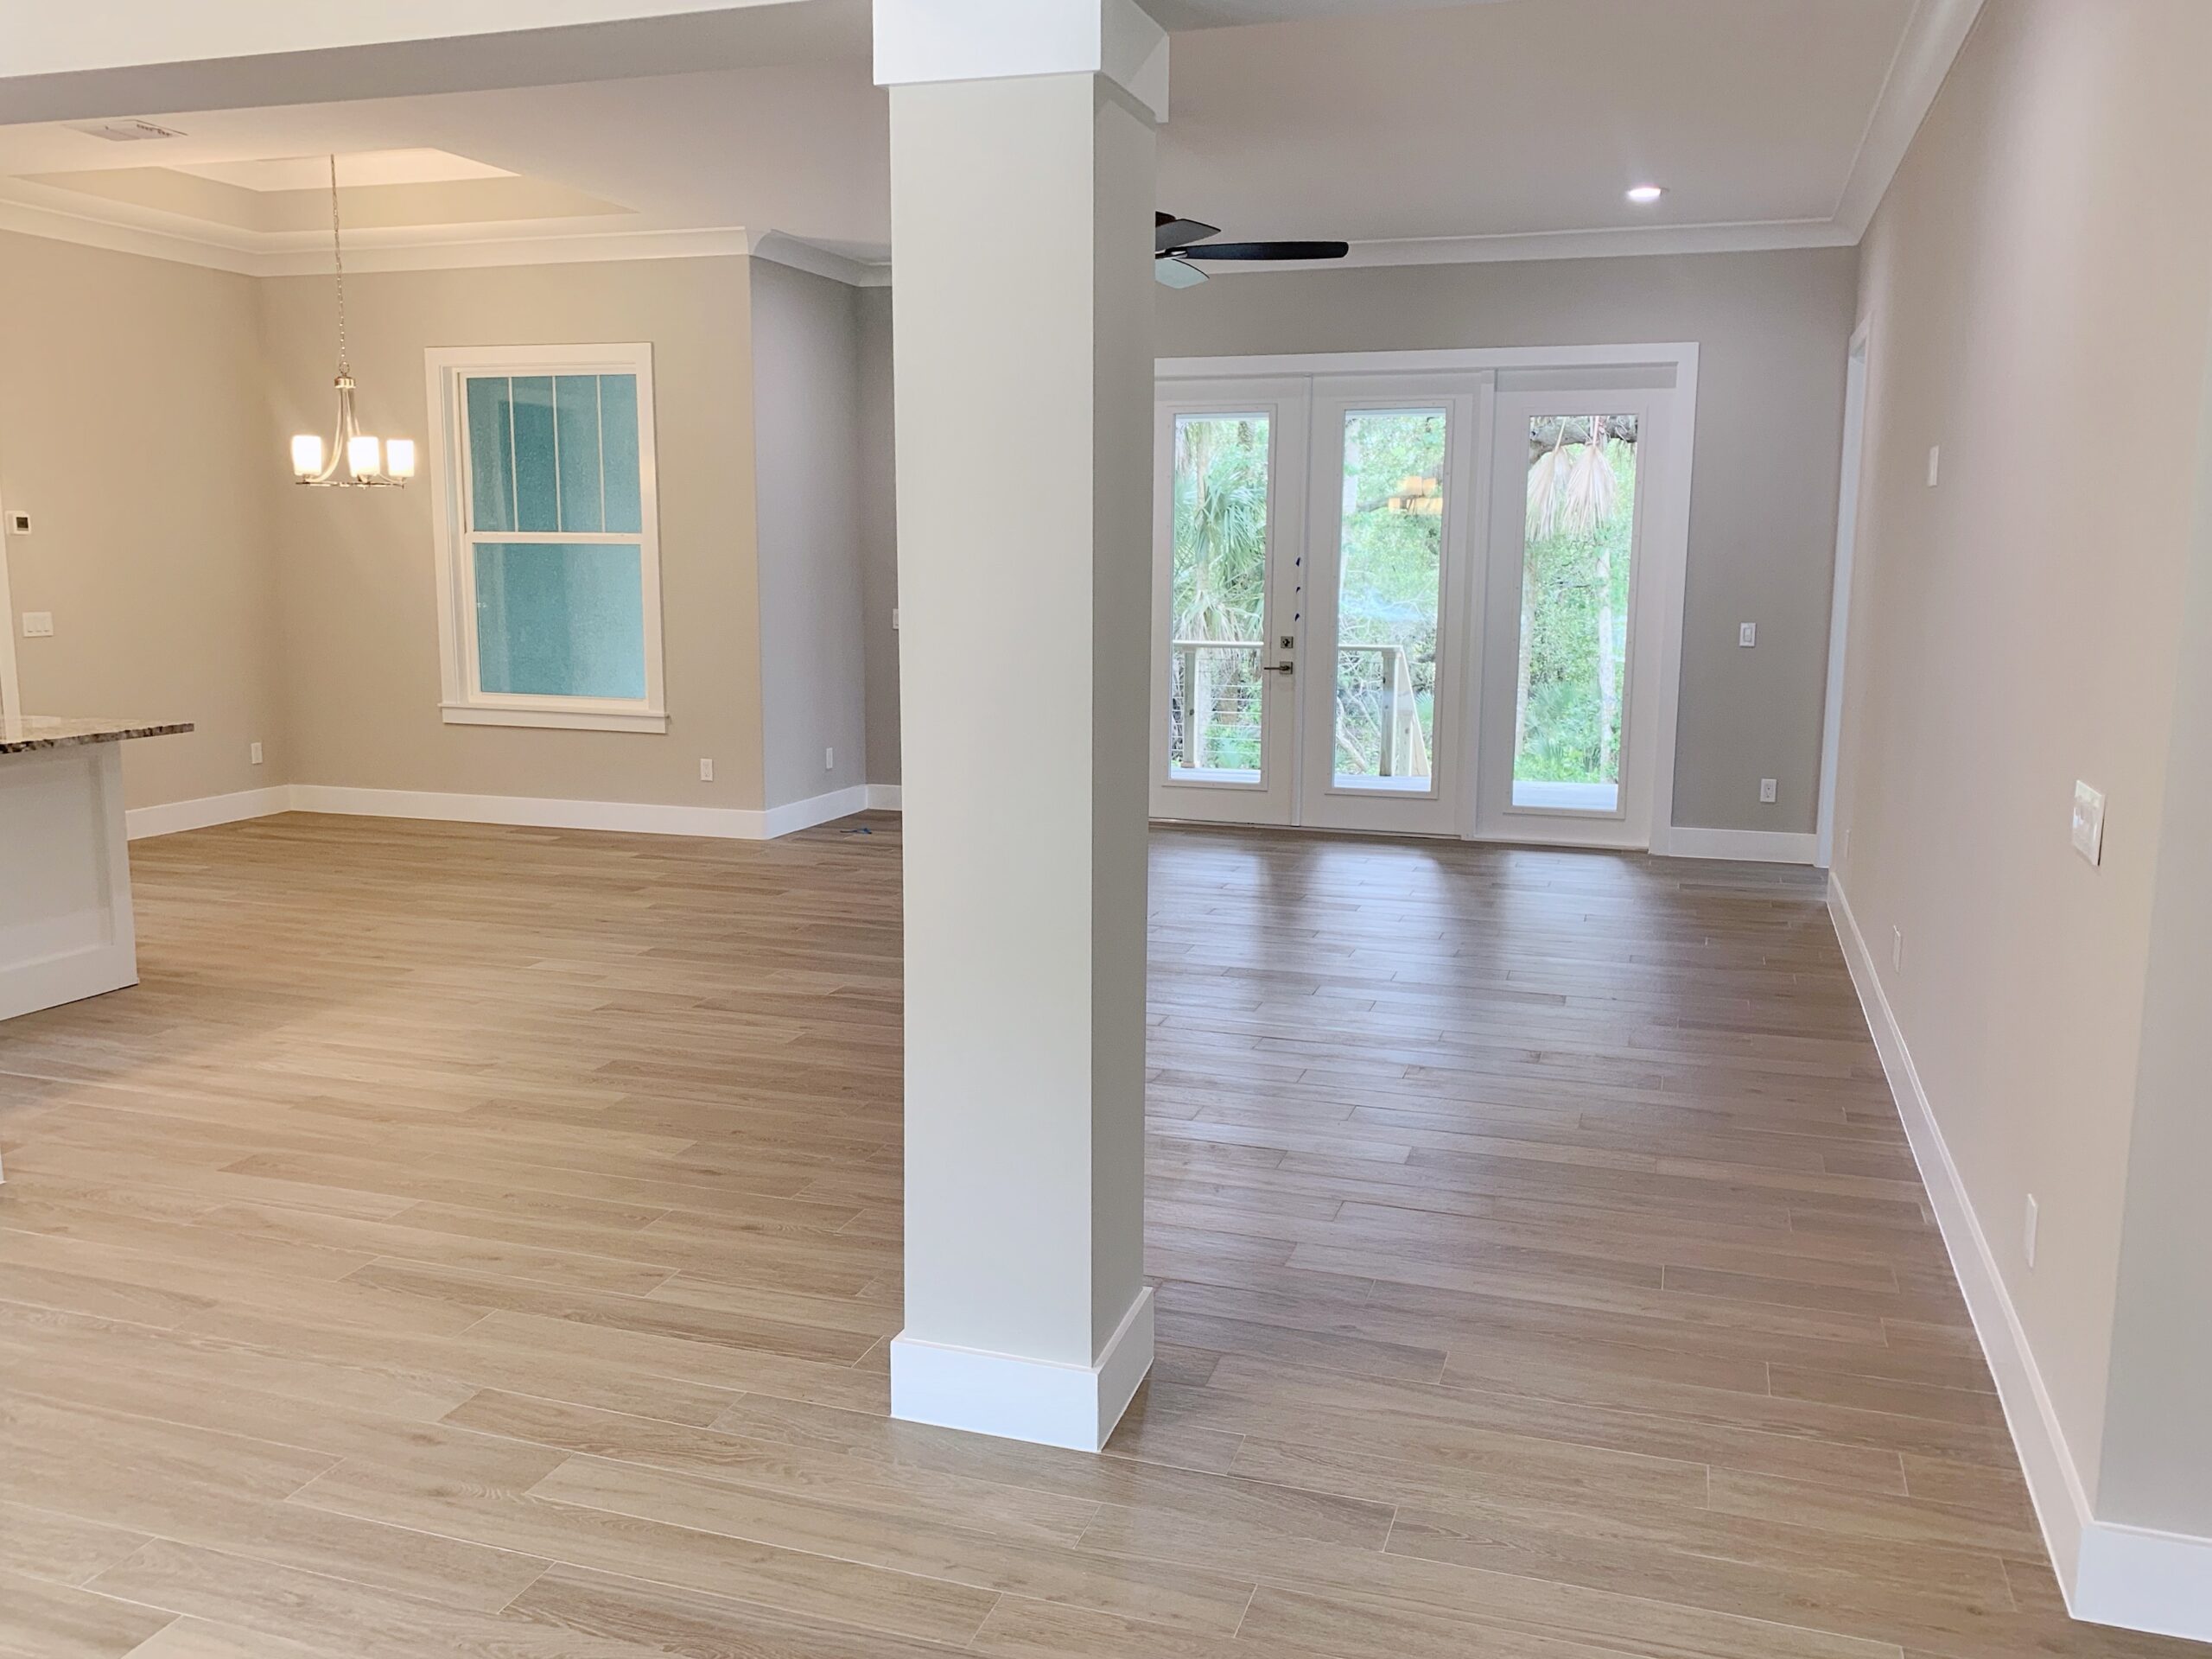 Vacant home staging